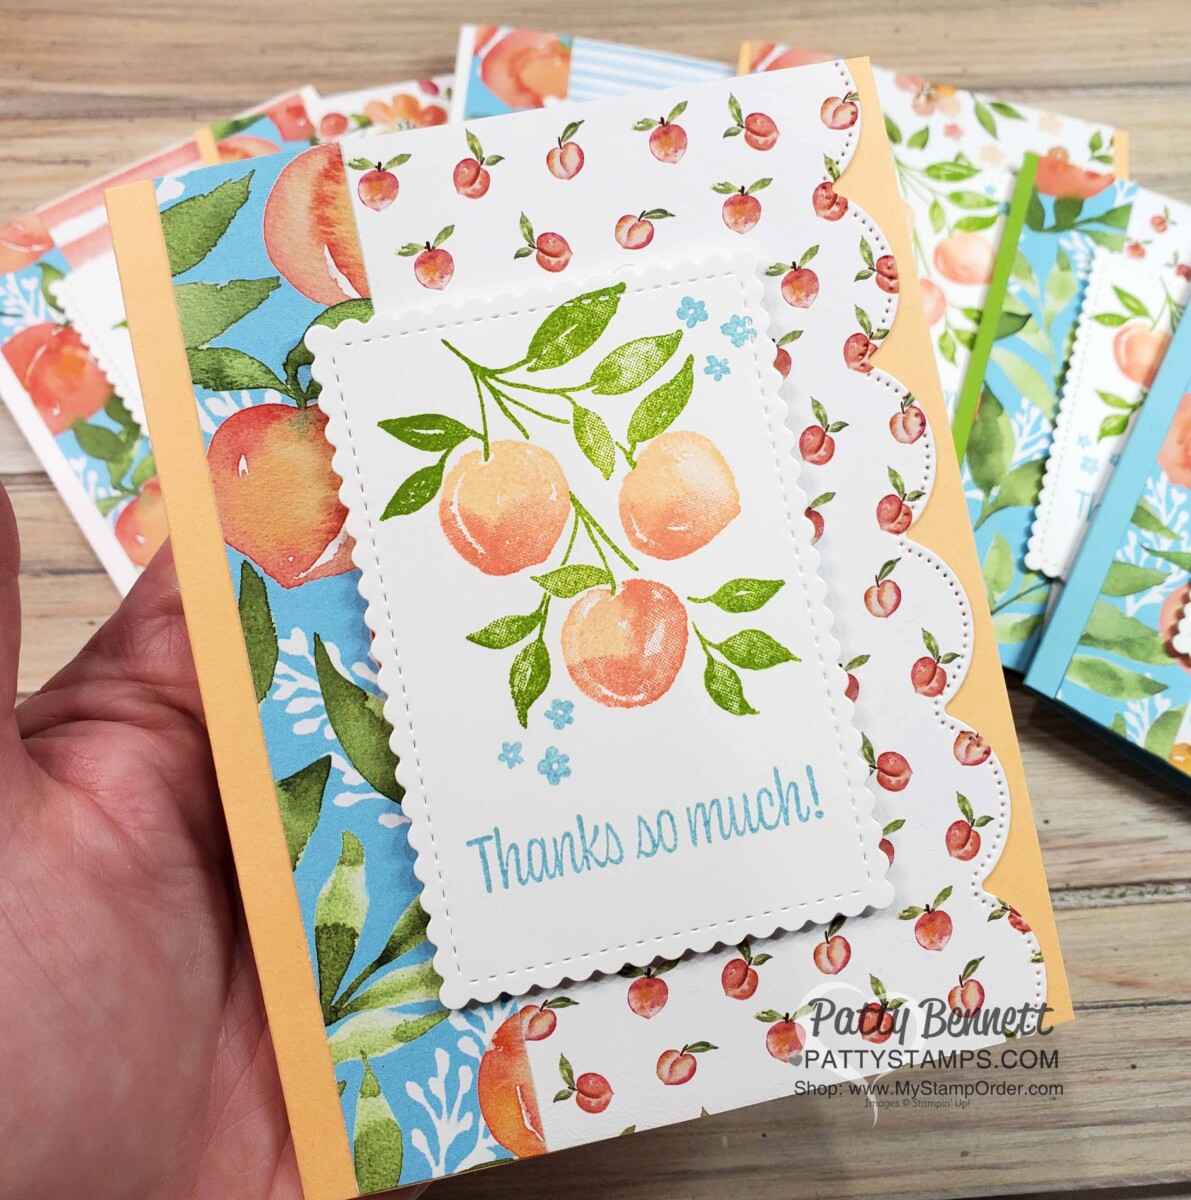 Tips for Stamping Sweet as a Peach from Stampin' Up! - Patty Stamps